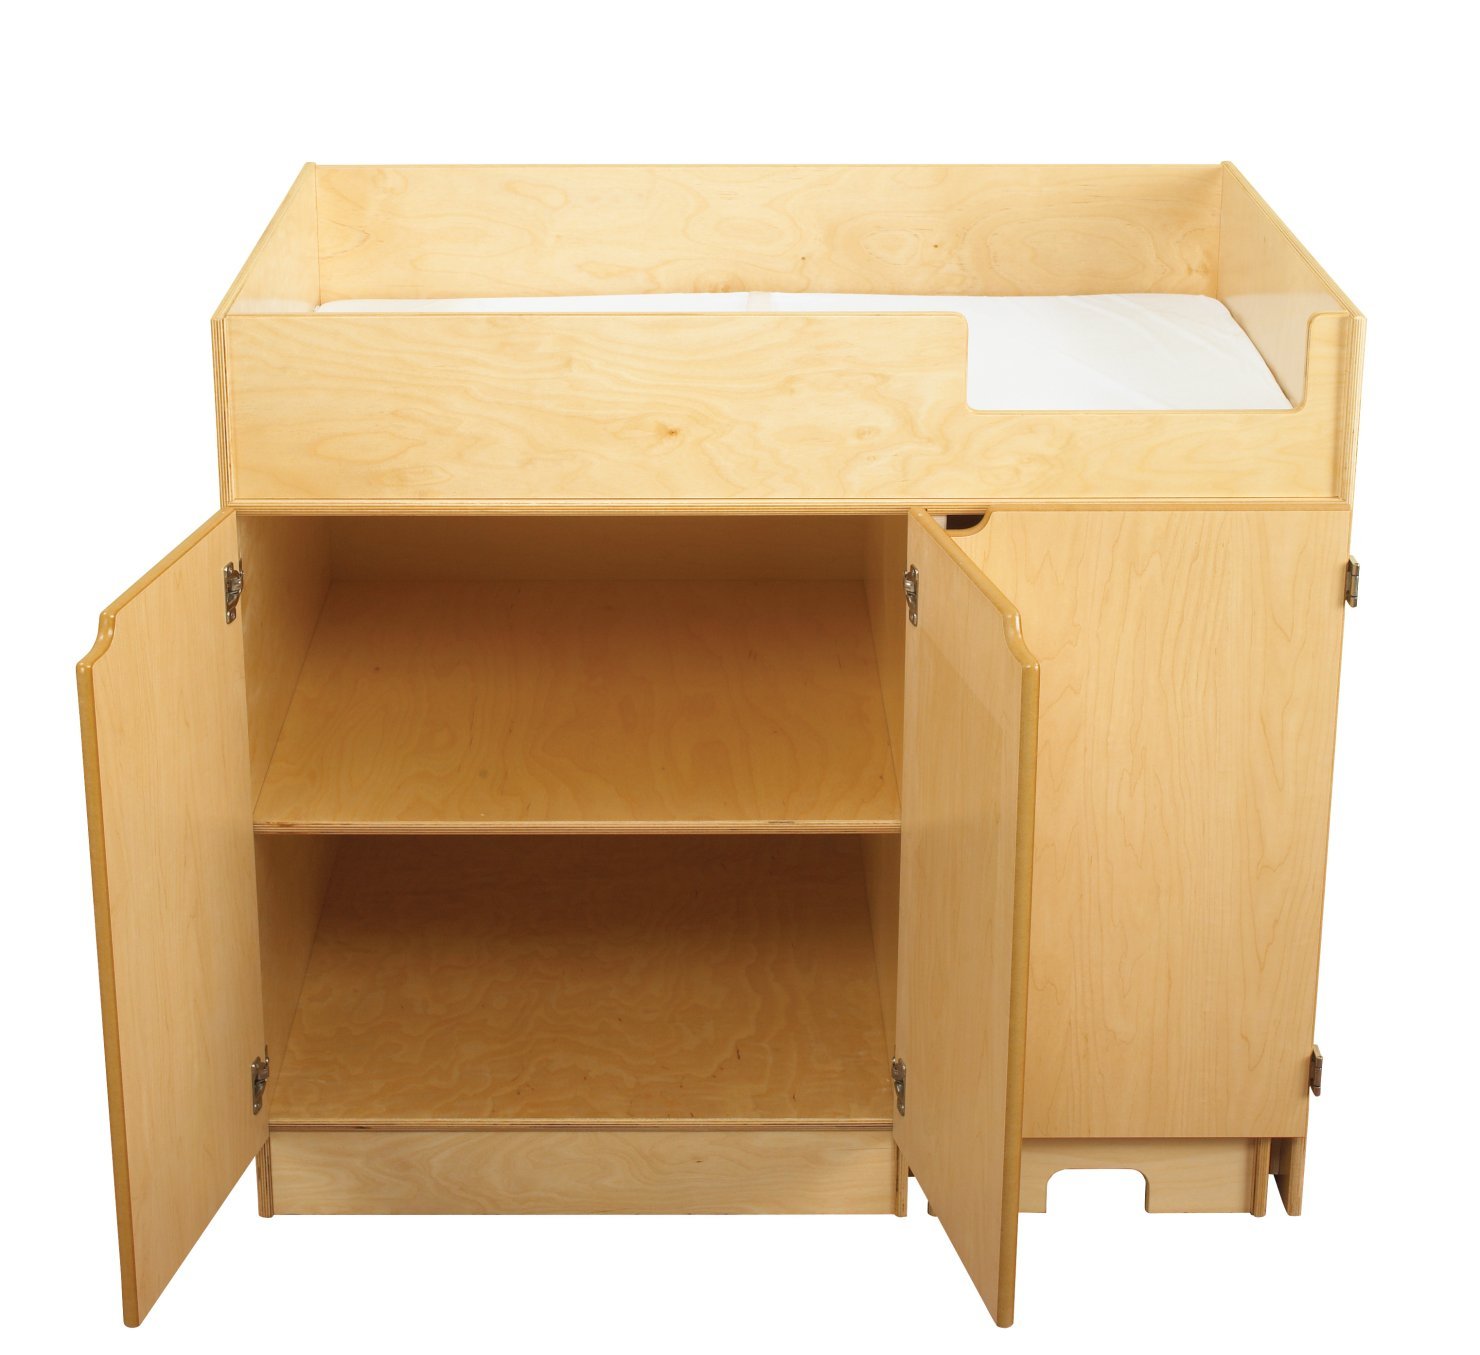 Childcraft 1464150 Changing Table with Steps, 42 x 27-1/8 x 37-1/2 Inches 37 5. Inches Height,27.13 Inches Width,42 Inches Length,Natural Wood